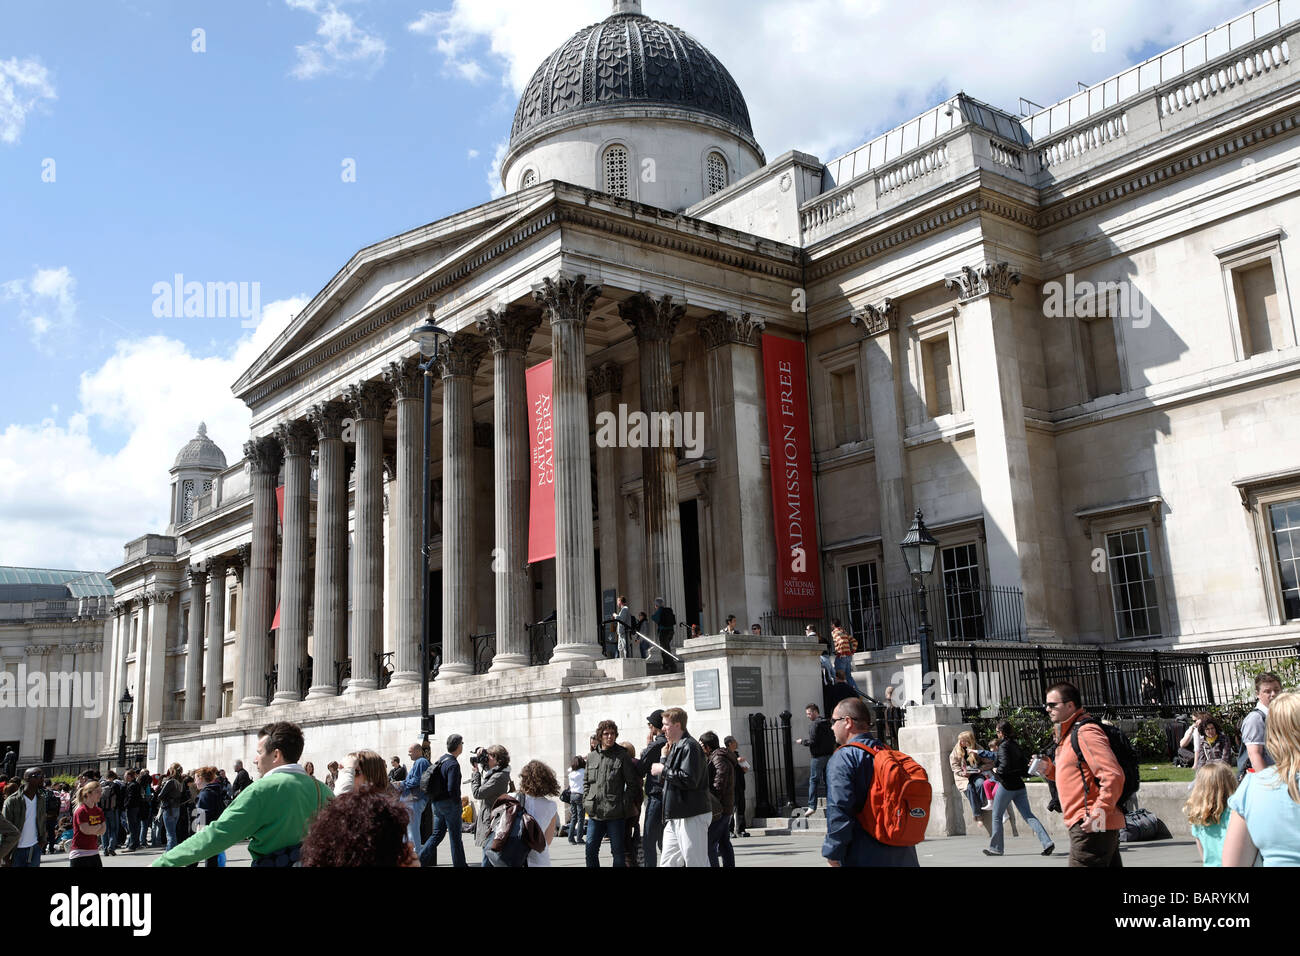 The National Gallery, London, England Stock Photo